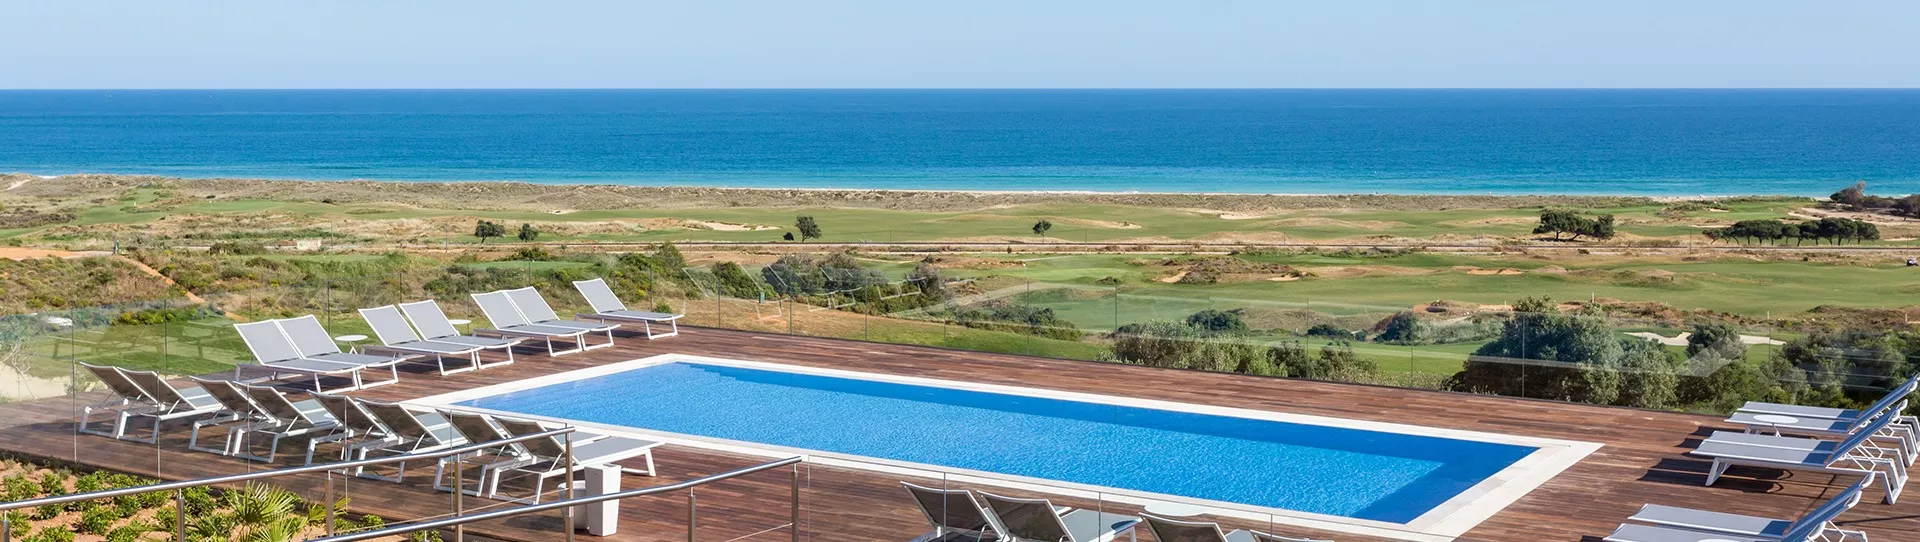 Portugal golf holidays - 3 Nights BB & 2 Golf Rounds - Photo 1